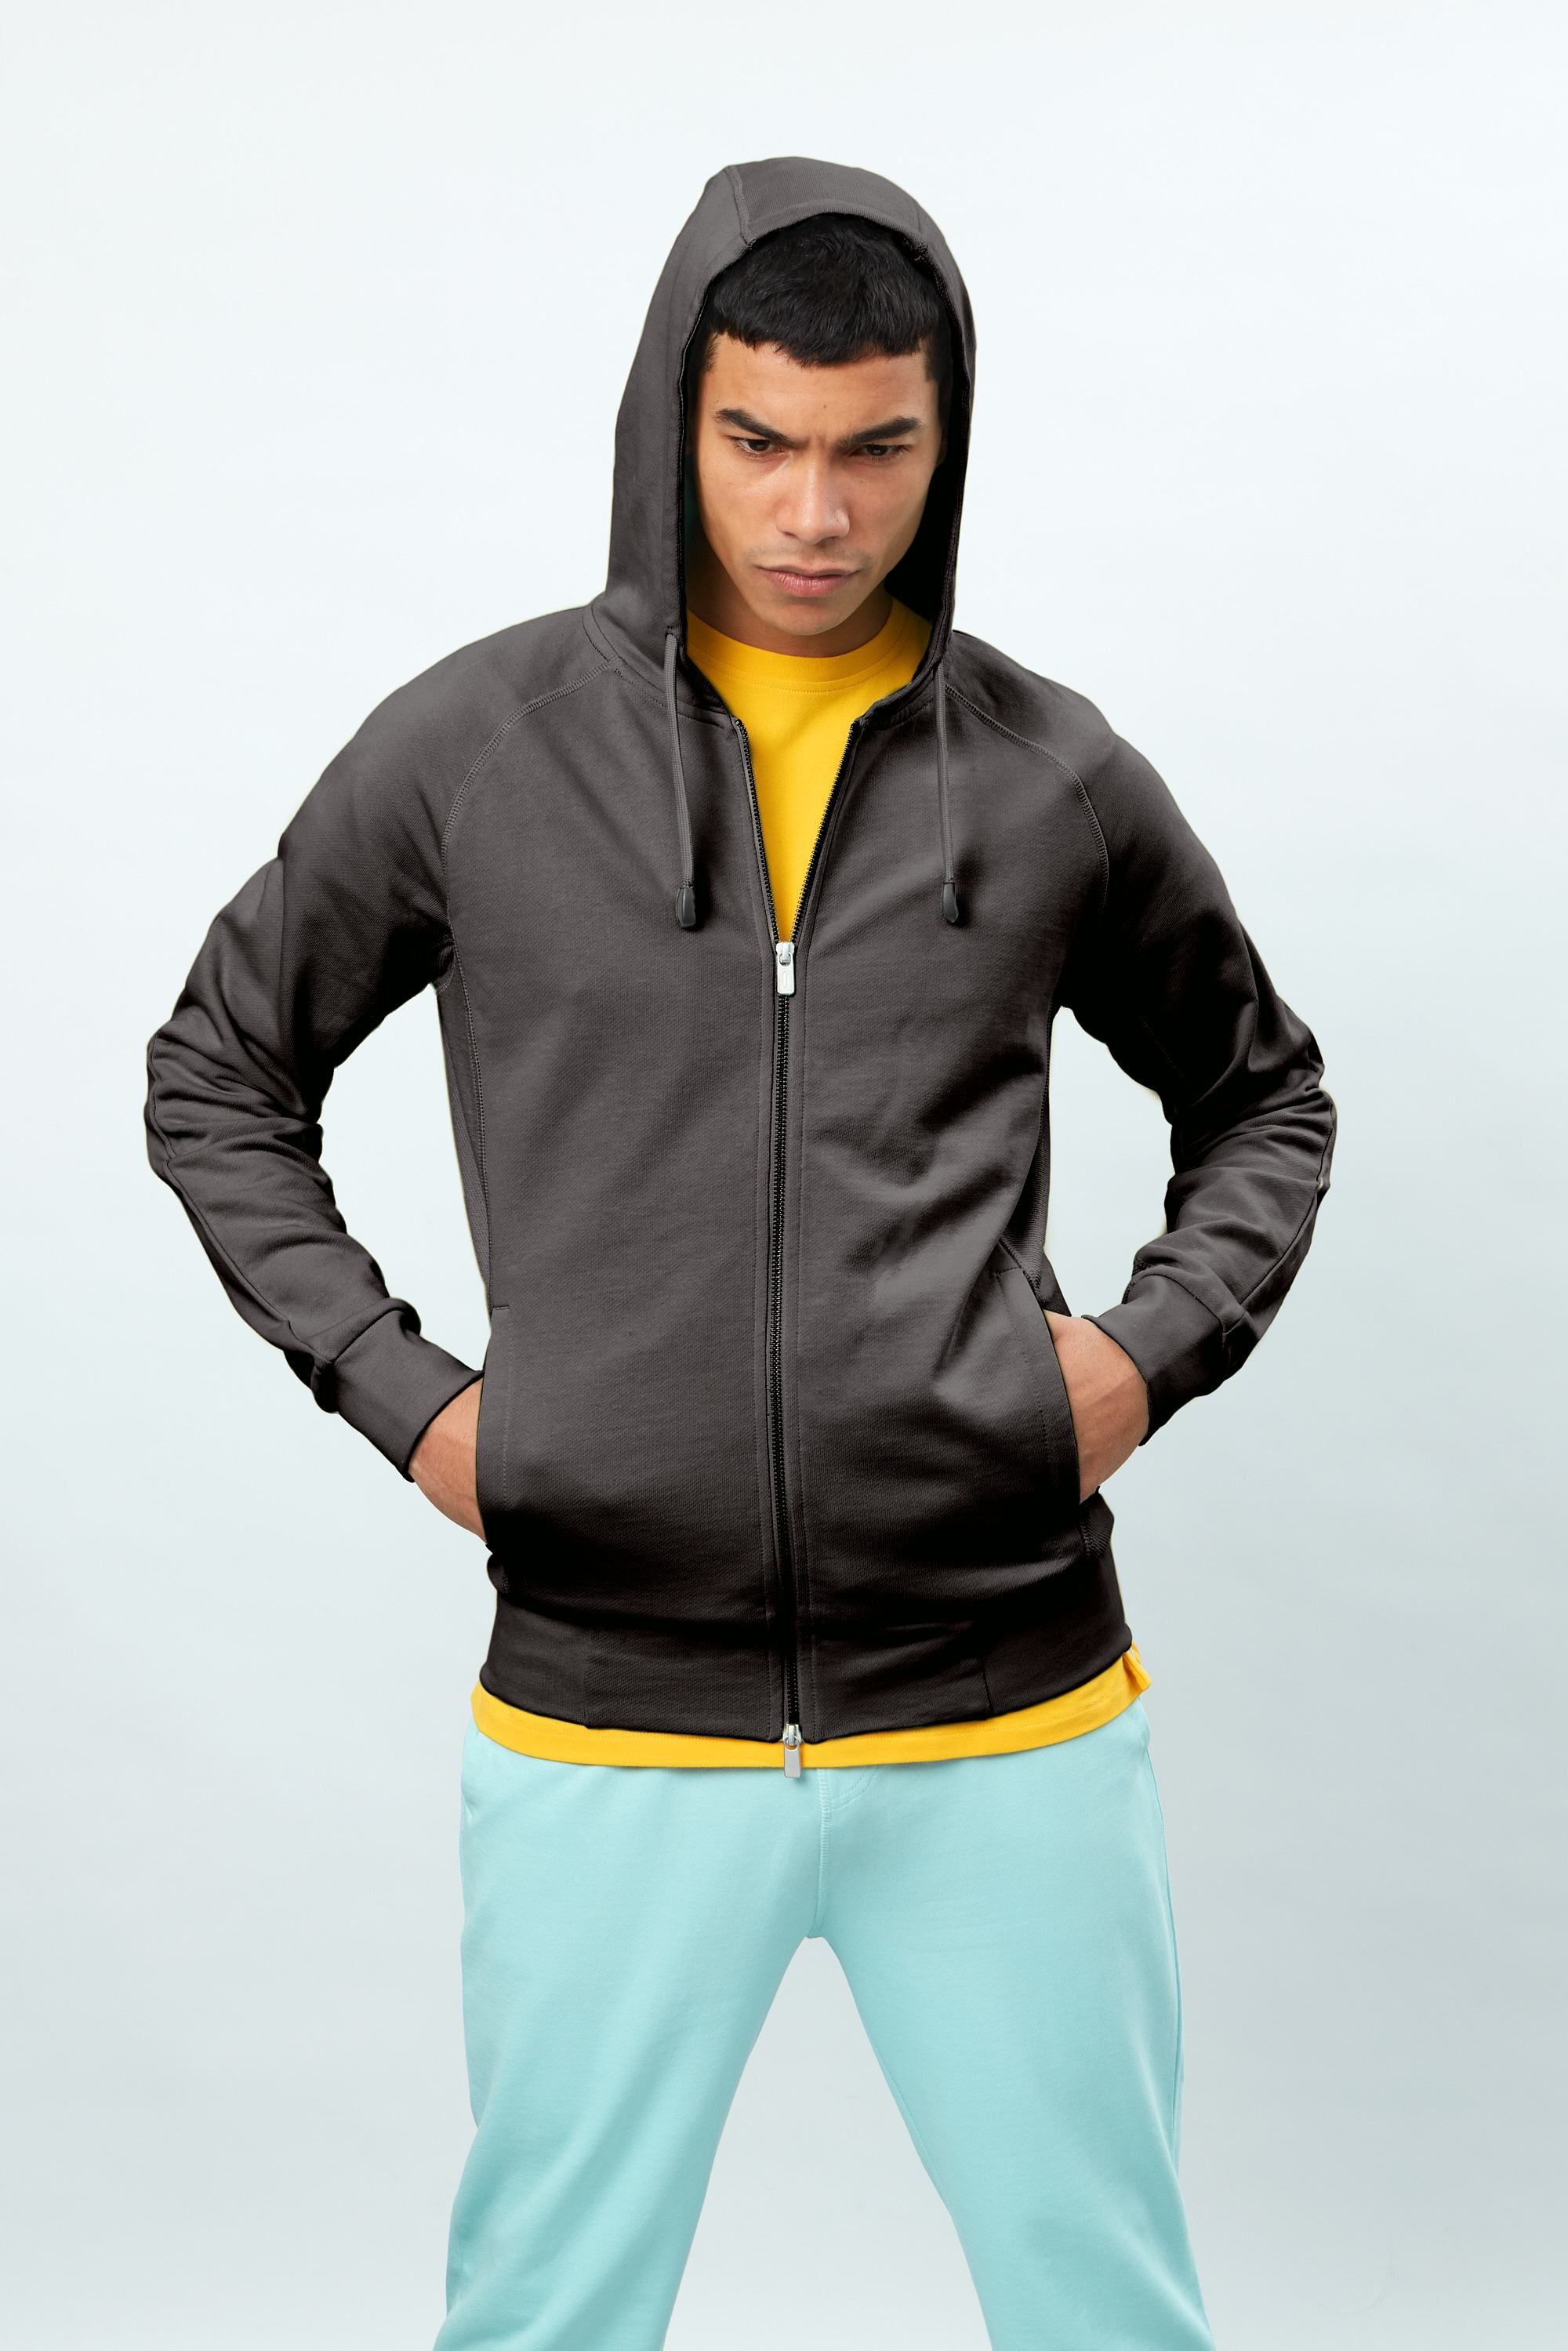 RJL0031B Lounge Hoody Loopback cotton
Reverse panel hoody in loopback cotton twill. 
KEY: Athletic, Utility, Downtime. 
DETAIL: Two-way zip front, monogrammed zip pulls, reverse side panels, drawstring hood, two front pockets, ribbed fit cuffs and hem, locker loop. 
FABRICATION: 100% cotton 
 